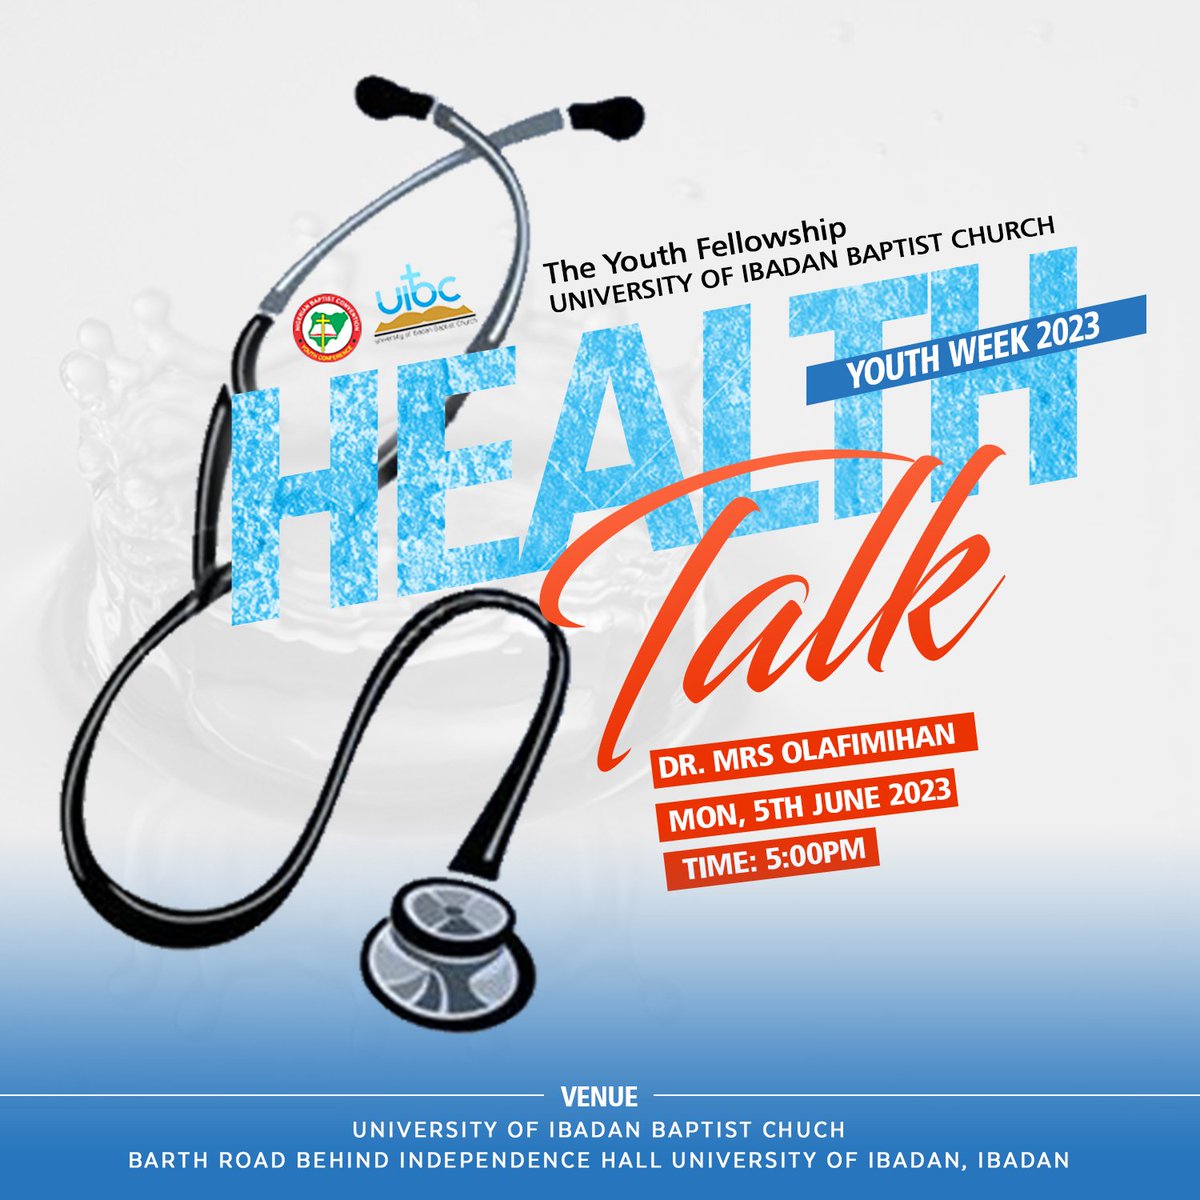 It's Youth week! Glory to God

Our program continues today with you and your health.

It is another opportunity to learn from our healthcare professionals on how to maintain  a healthy lifestyle.

@officialnbchq
#Youthweek
#healthtalk